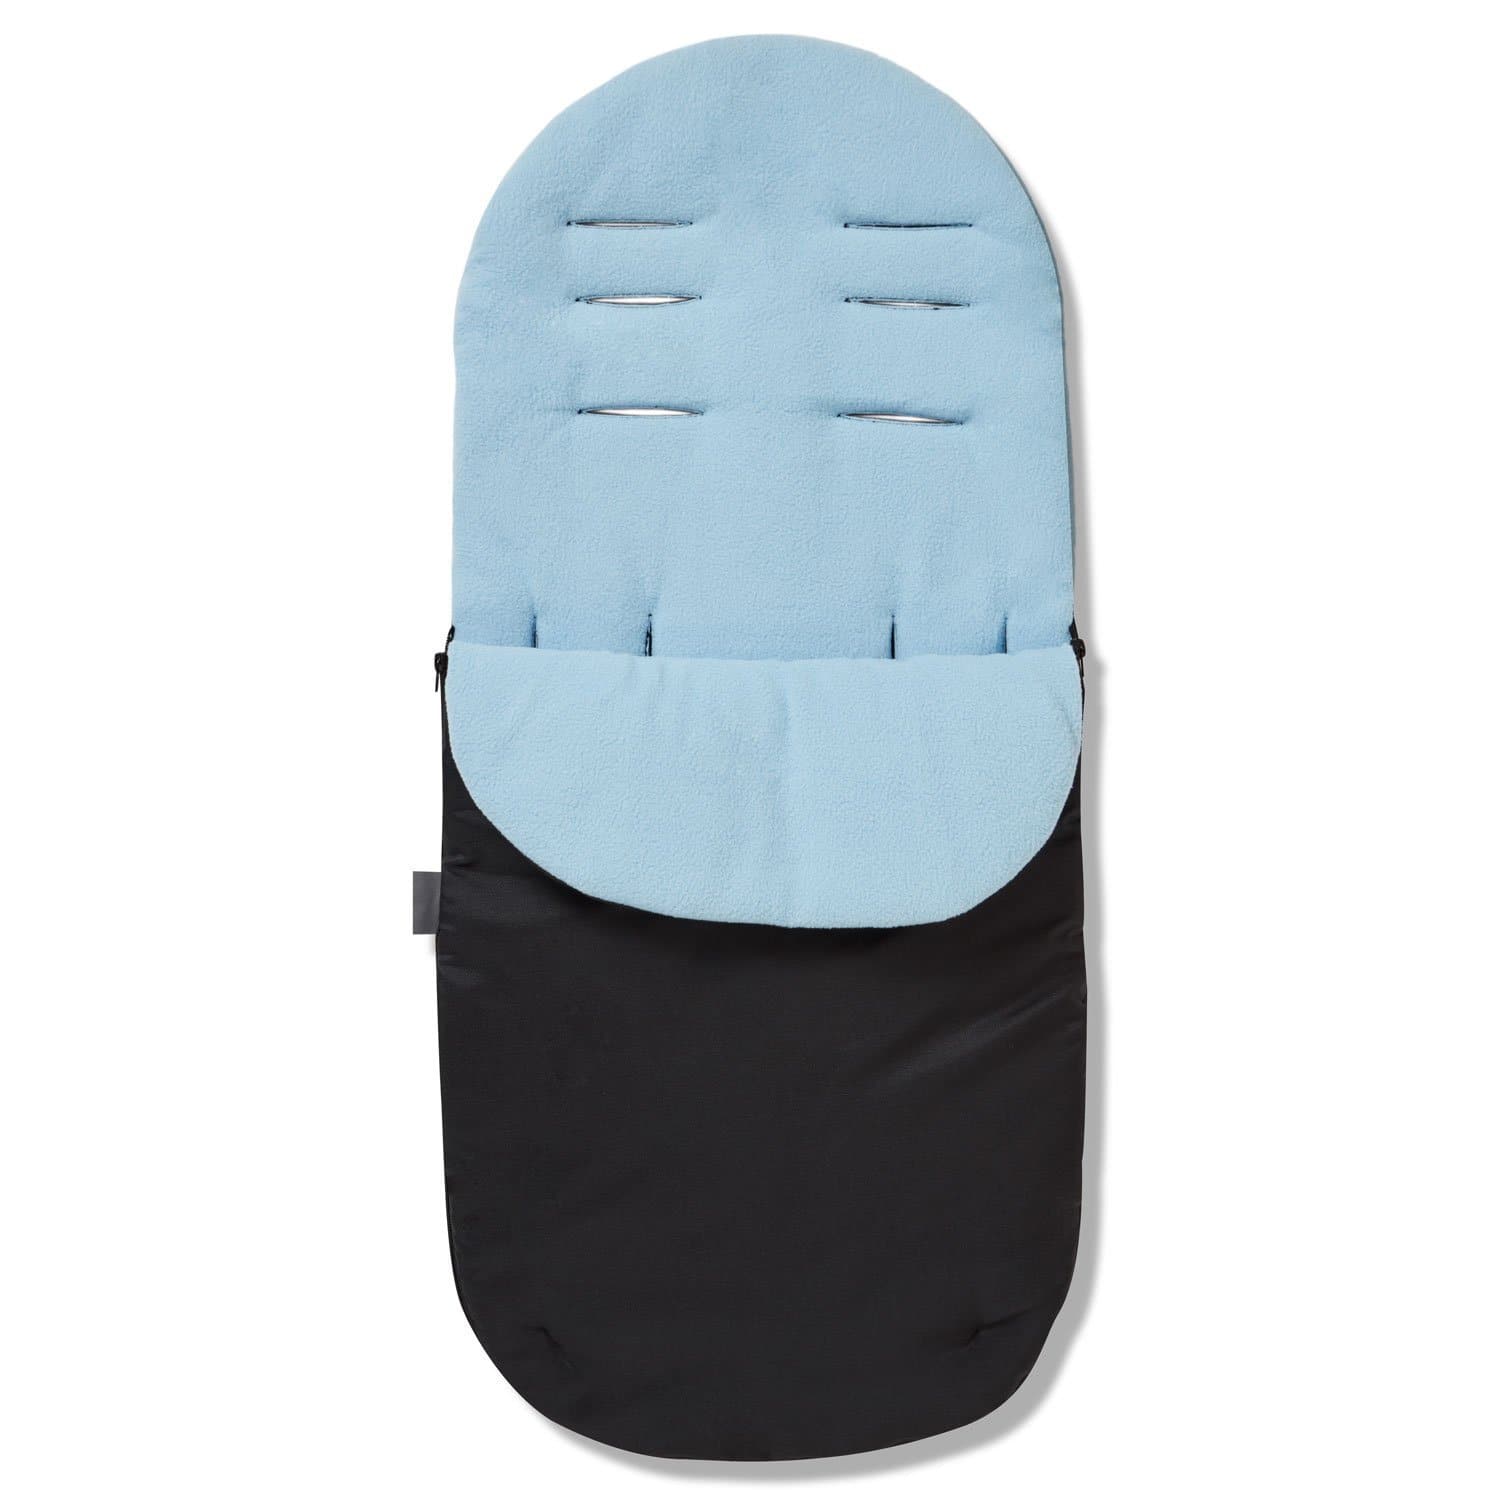 Footmuff / Cosy Toes Compatible with Chicco - For Your Little One